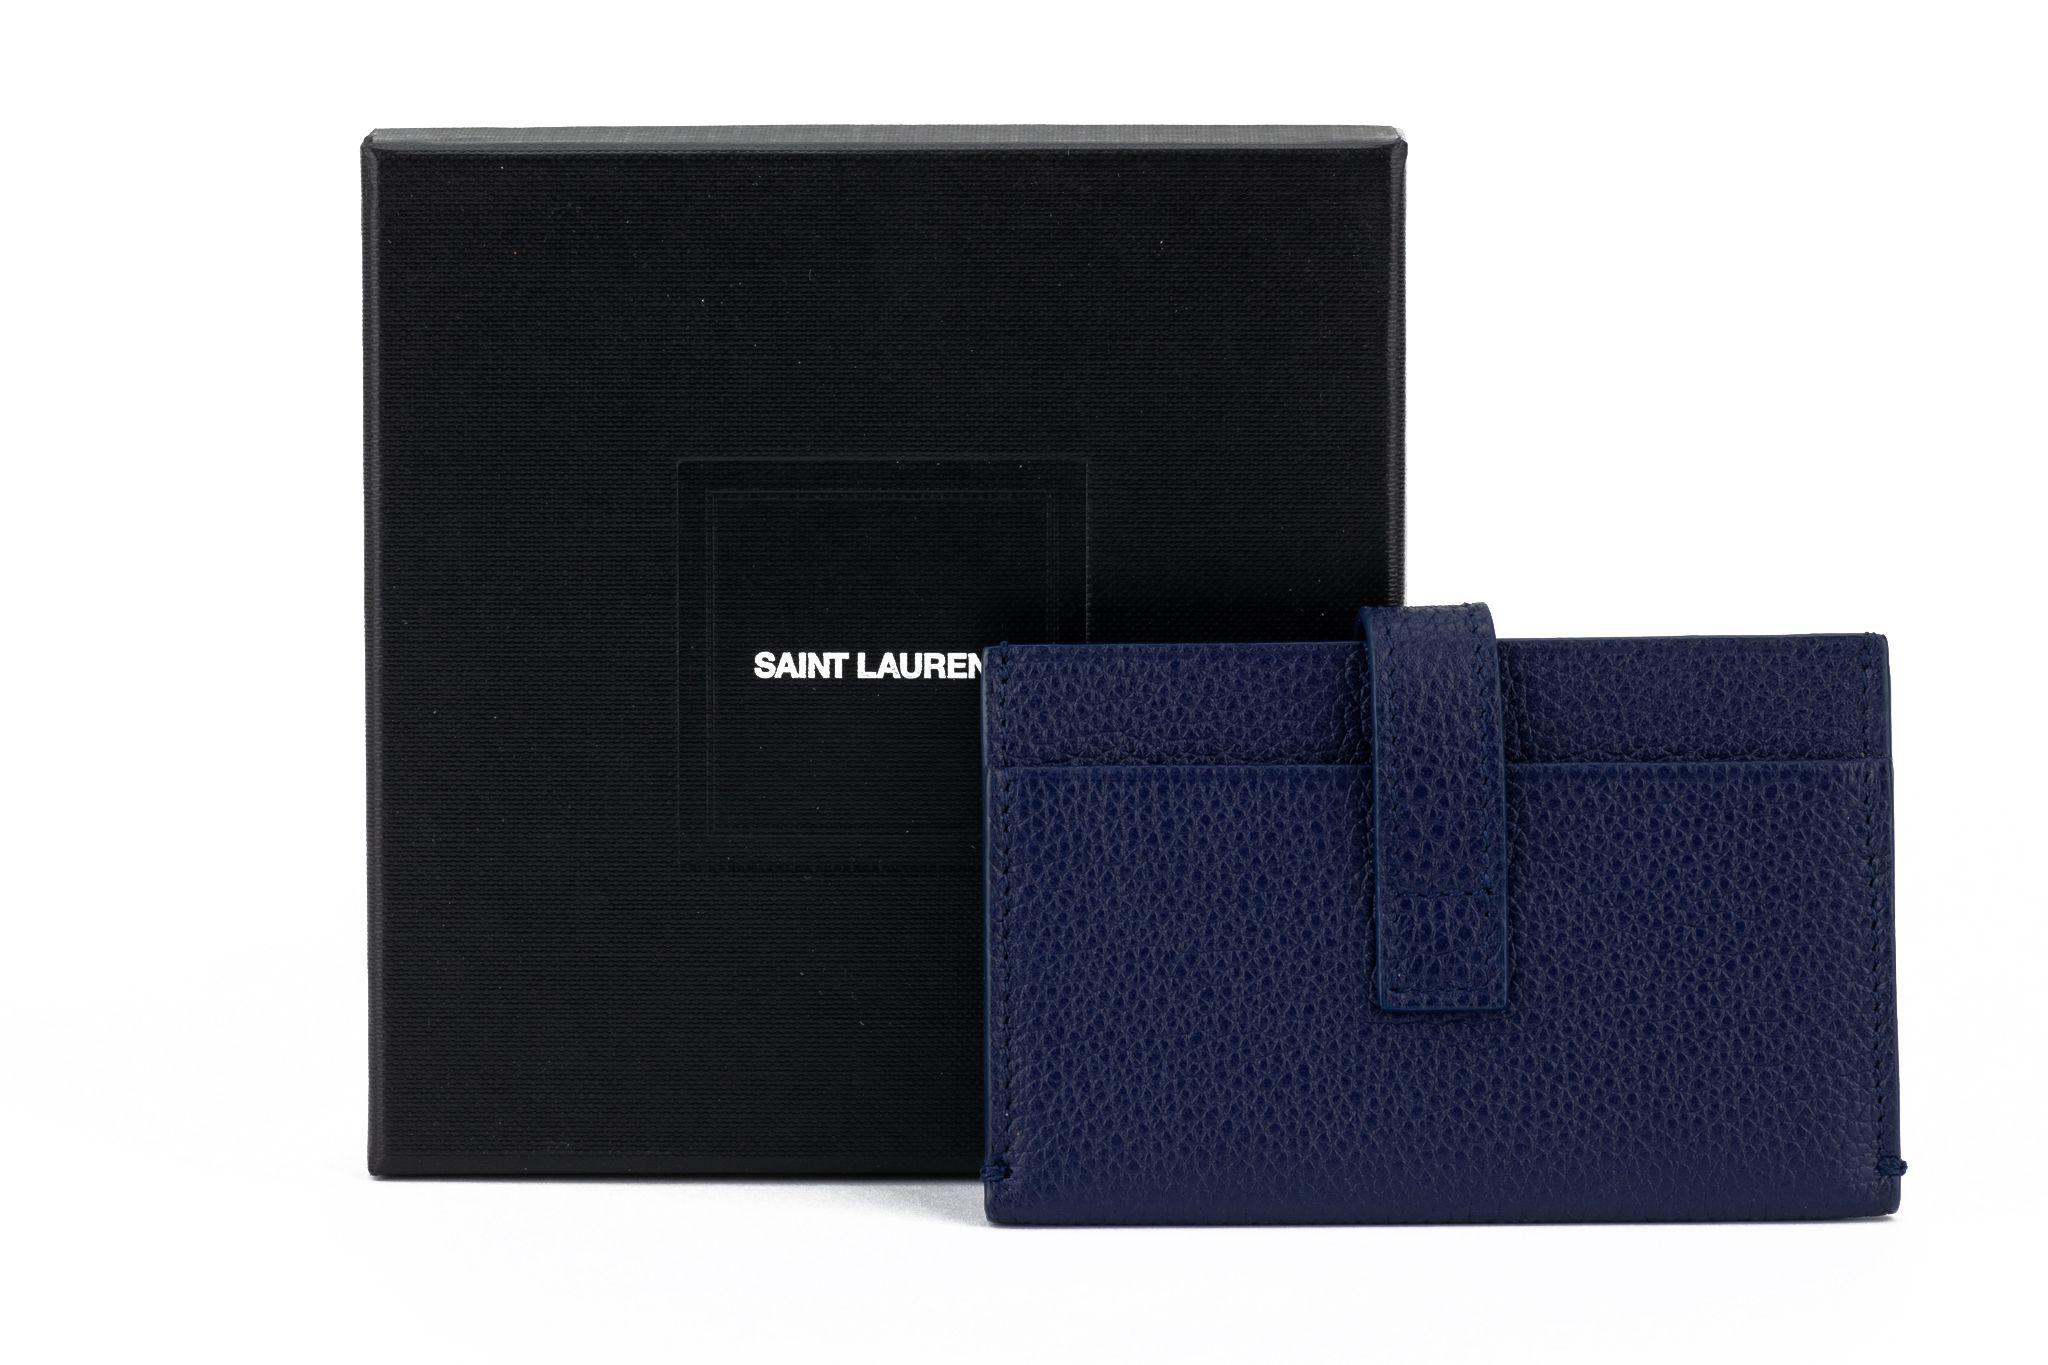 YSL brand new unisex credit card wallet, navy blue pebbled leather with logo silver details.
Comes with original dustcover and box.